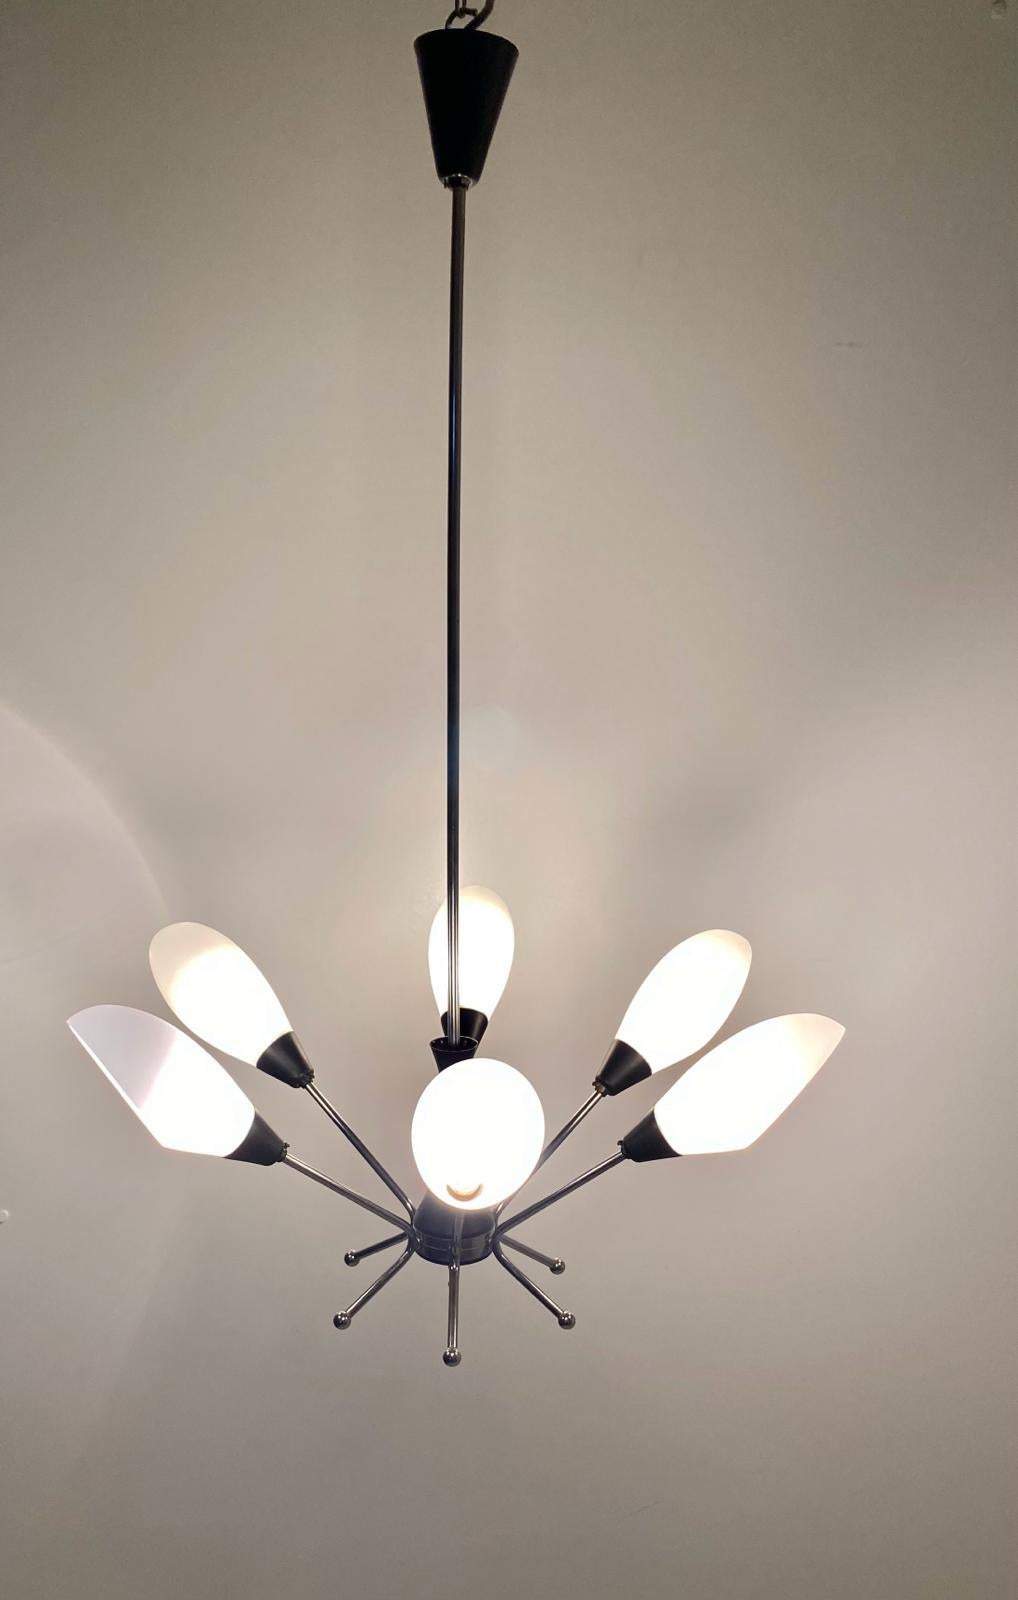 Midcentury modern Sputnik Chandelier attributed to Stilnovo and manufactured in Italy in the 1960 's.

Chromed steel structure and six lights with white opaline glass lampshades. 

Revised and restored from our team, perfectly working. Very good